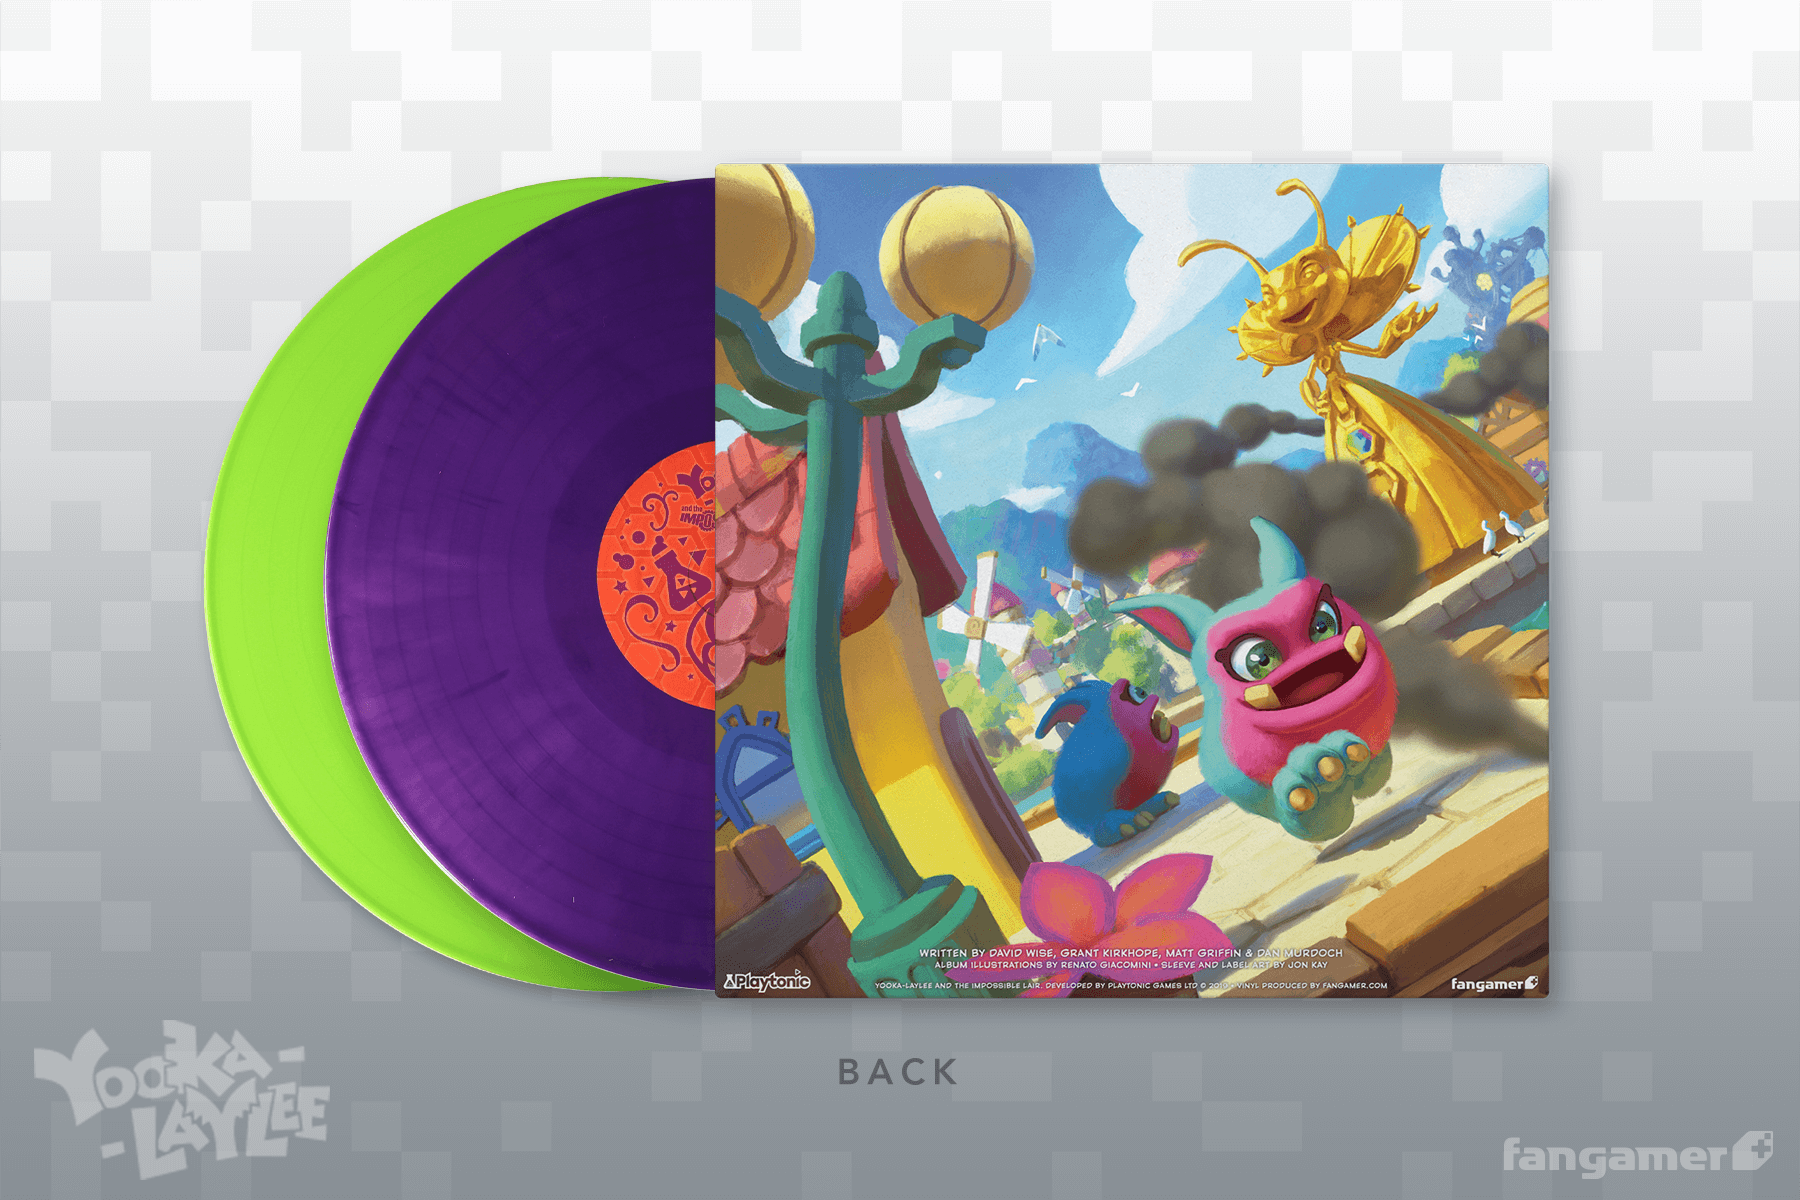 Yooka-Laylee and the Impossible Lair Soundtrack on Double Vinyl with Back Sleeve